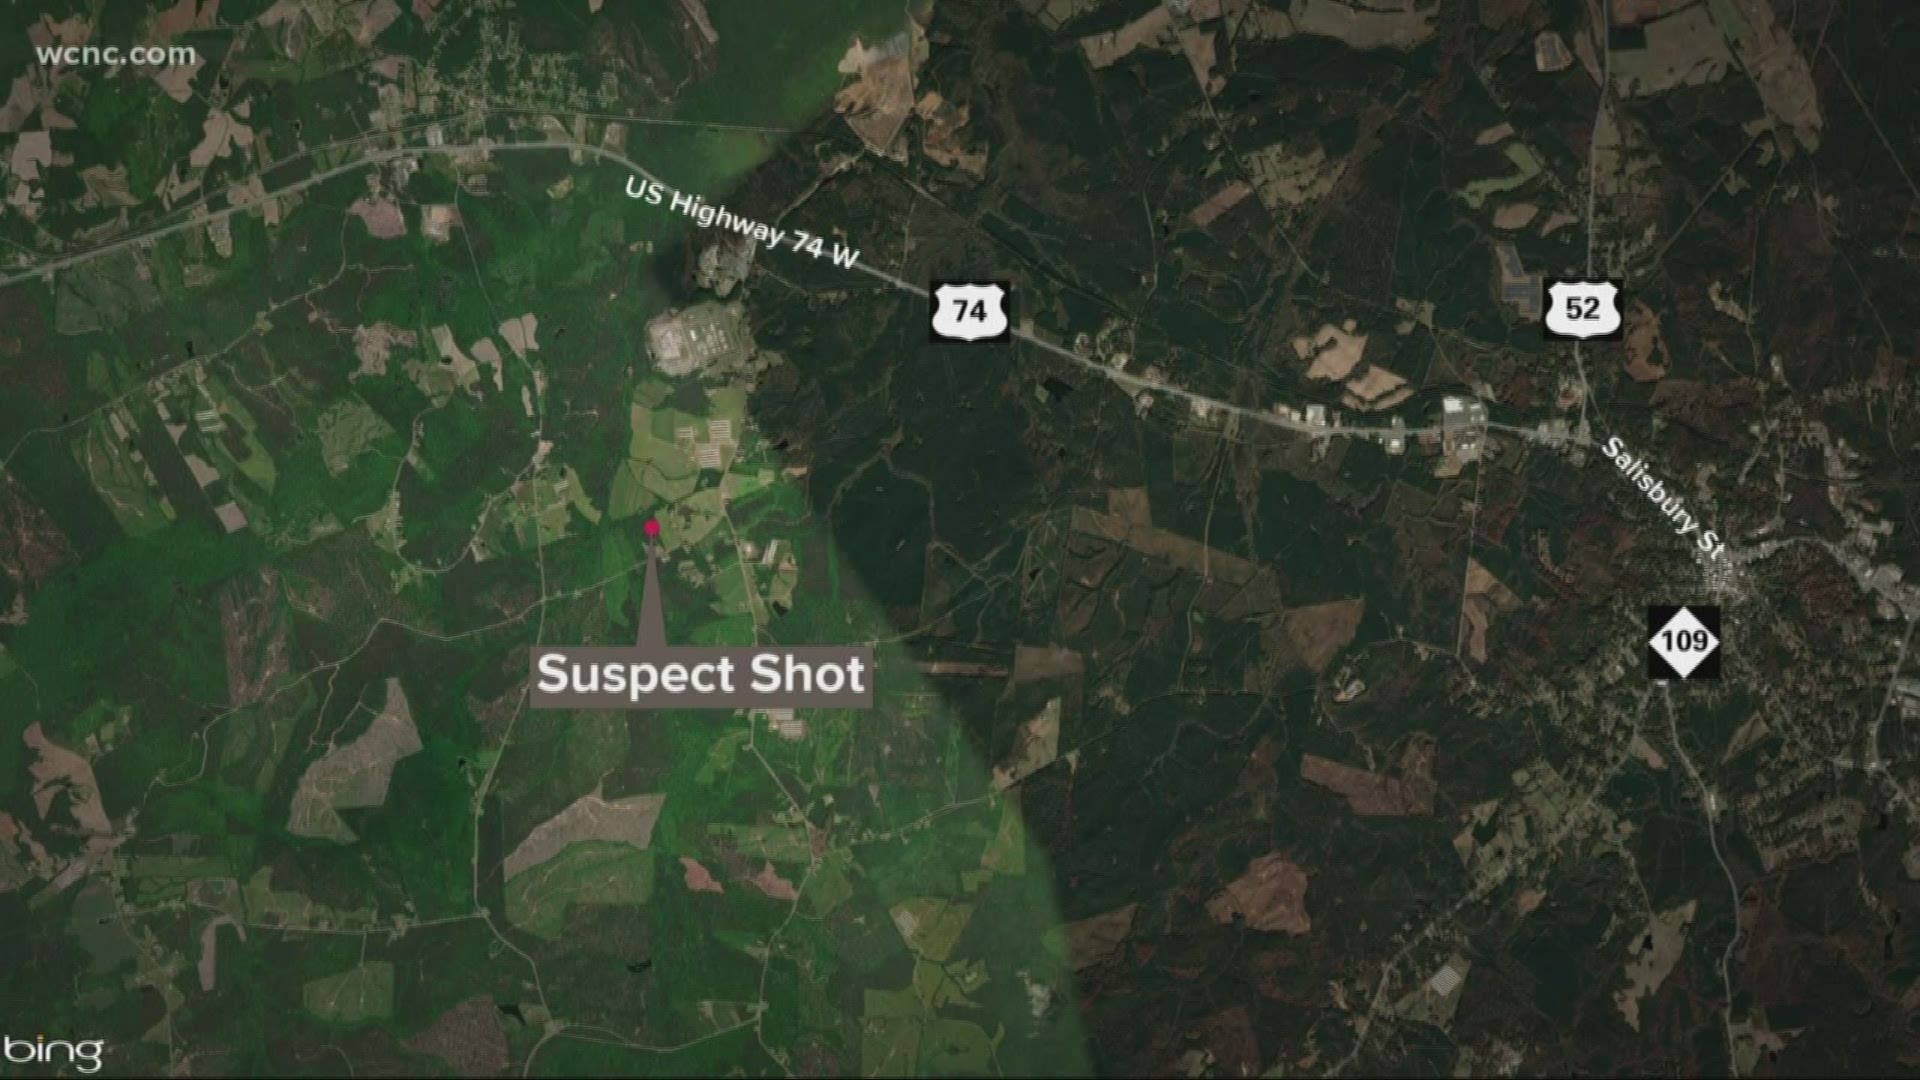 Deputies responded to a call for shots fired at an Anson County home. The suspect took off in a truck, getting onto the highway, leading to a police pursuit.